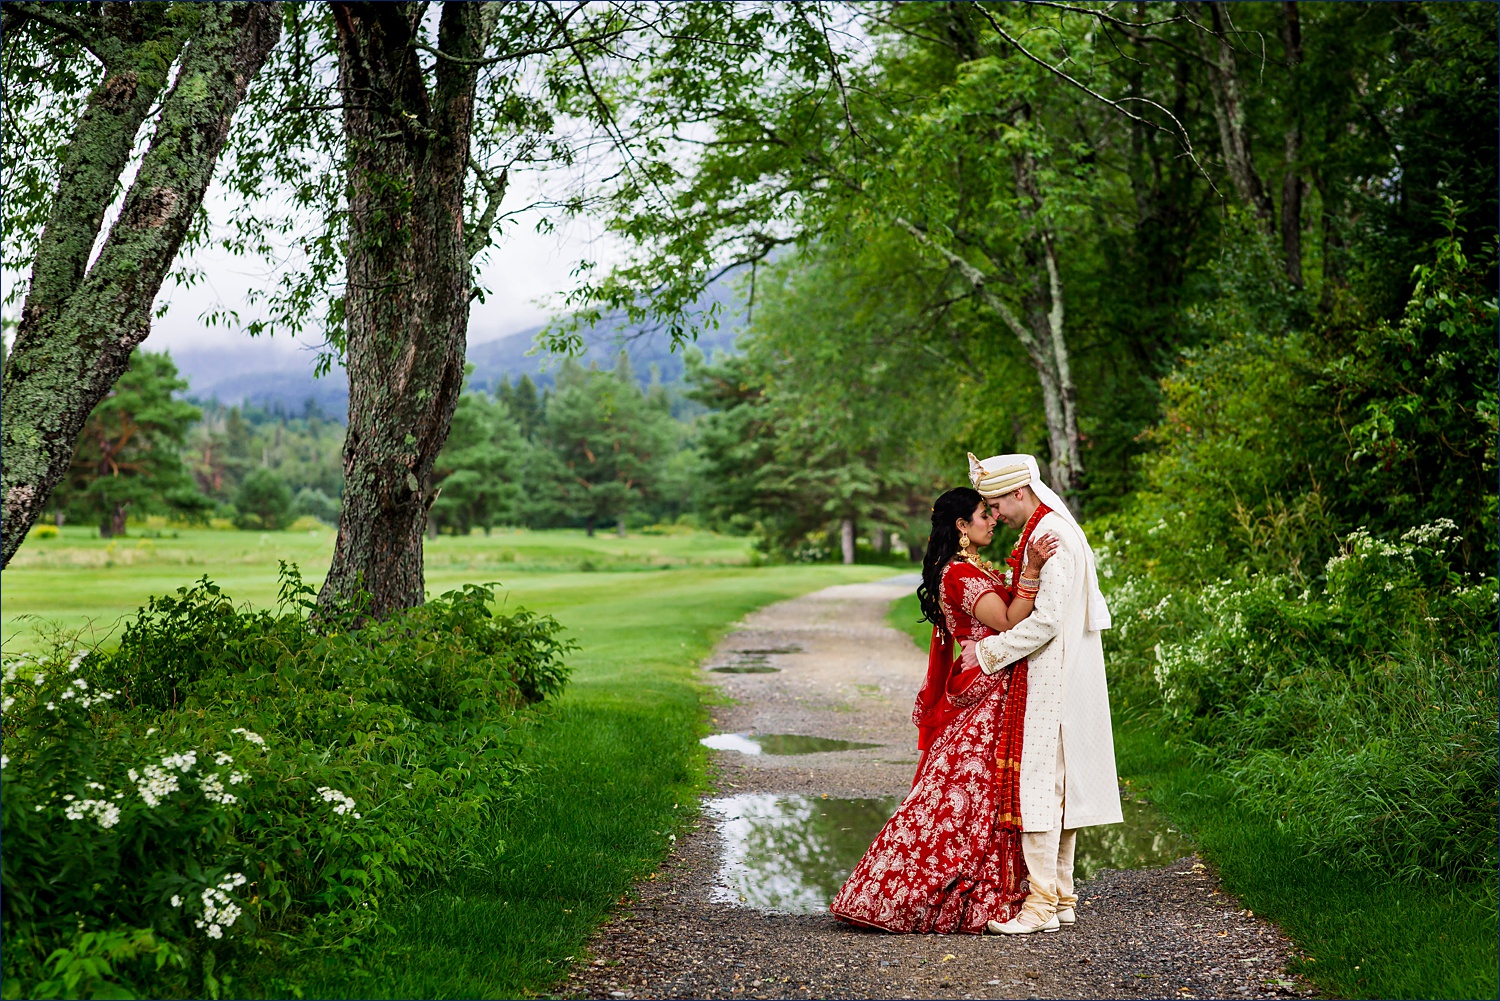 The couple stands together under a tree canopy on their White Mountain Hindu wedding day